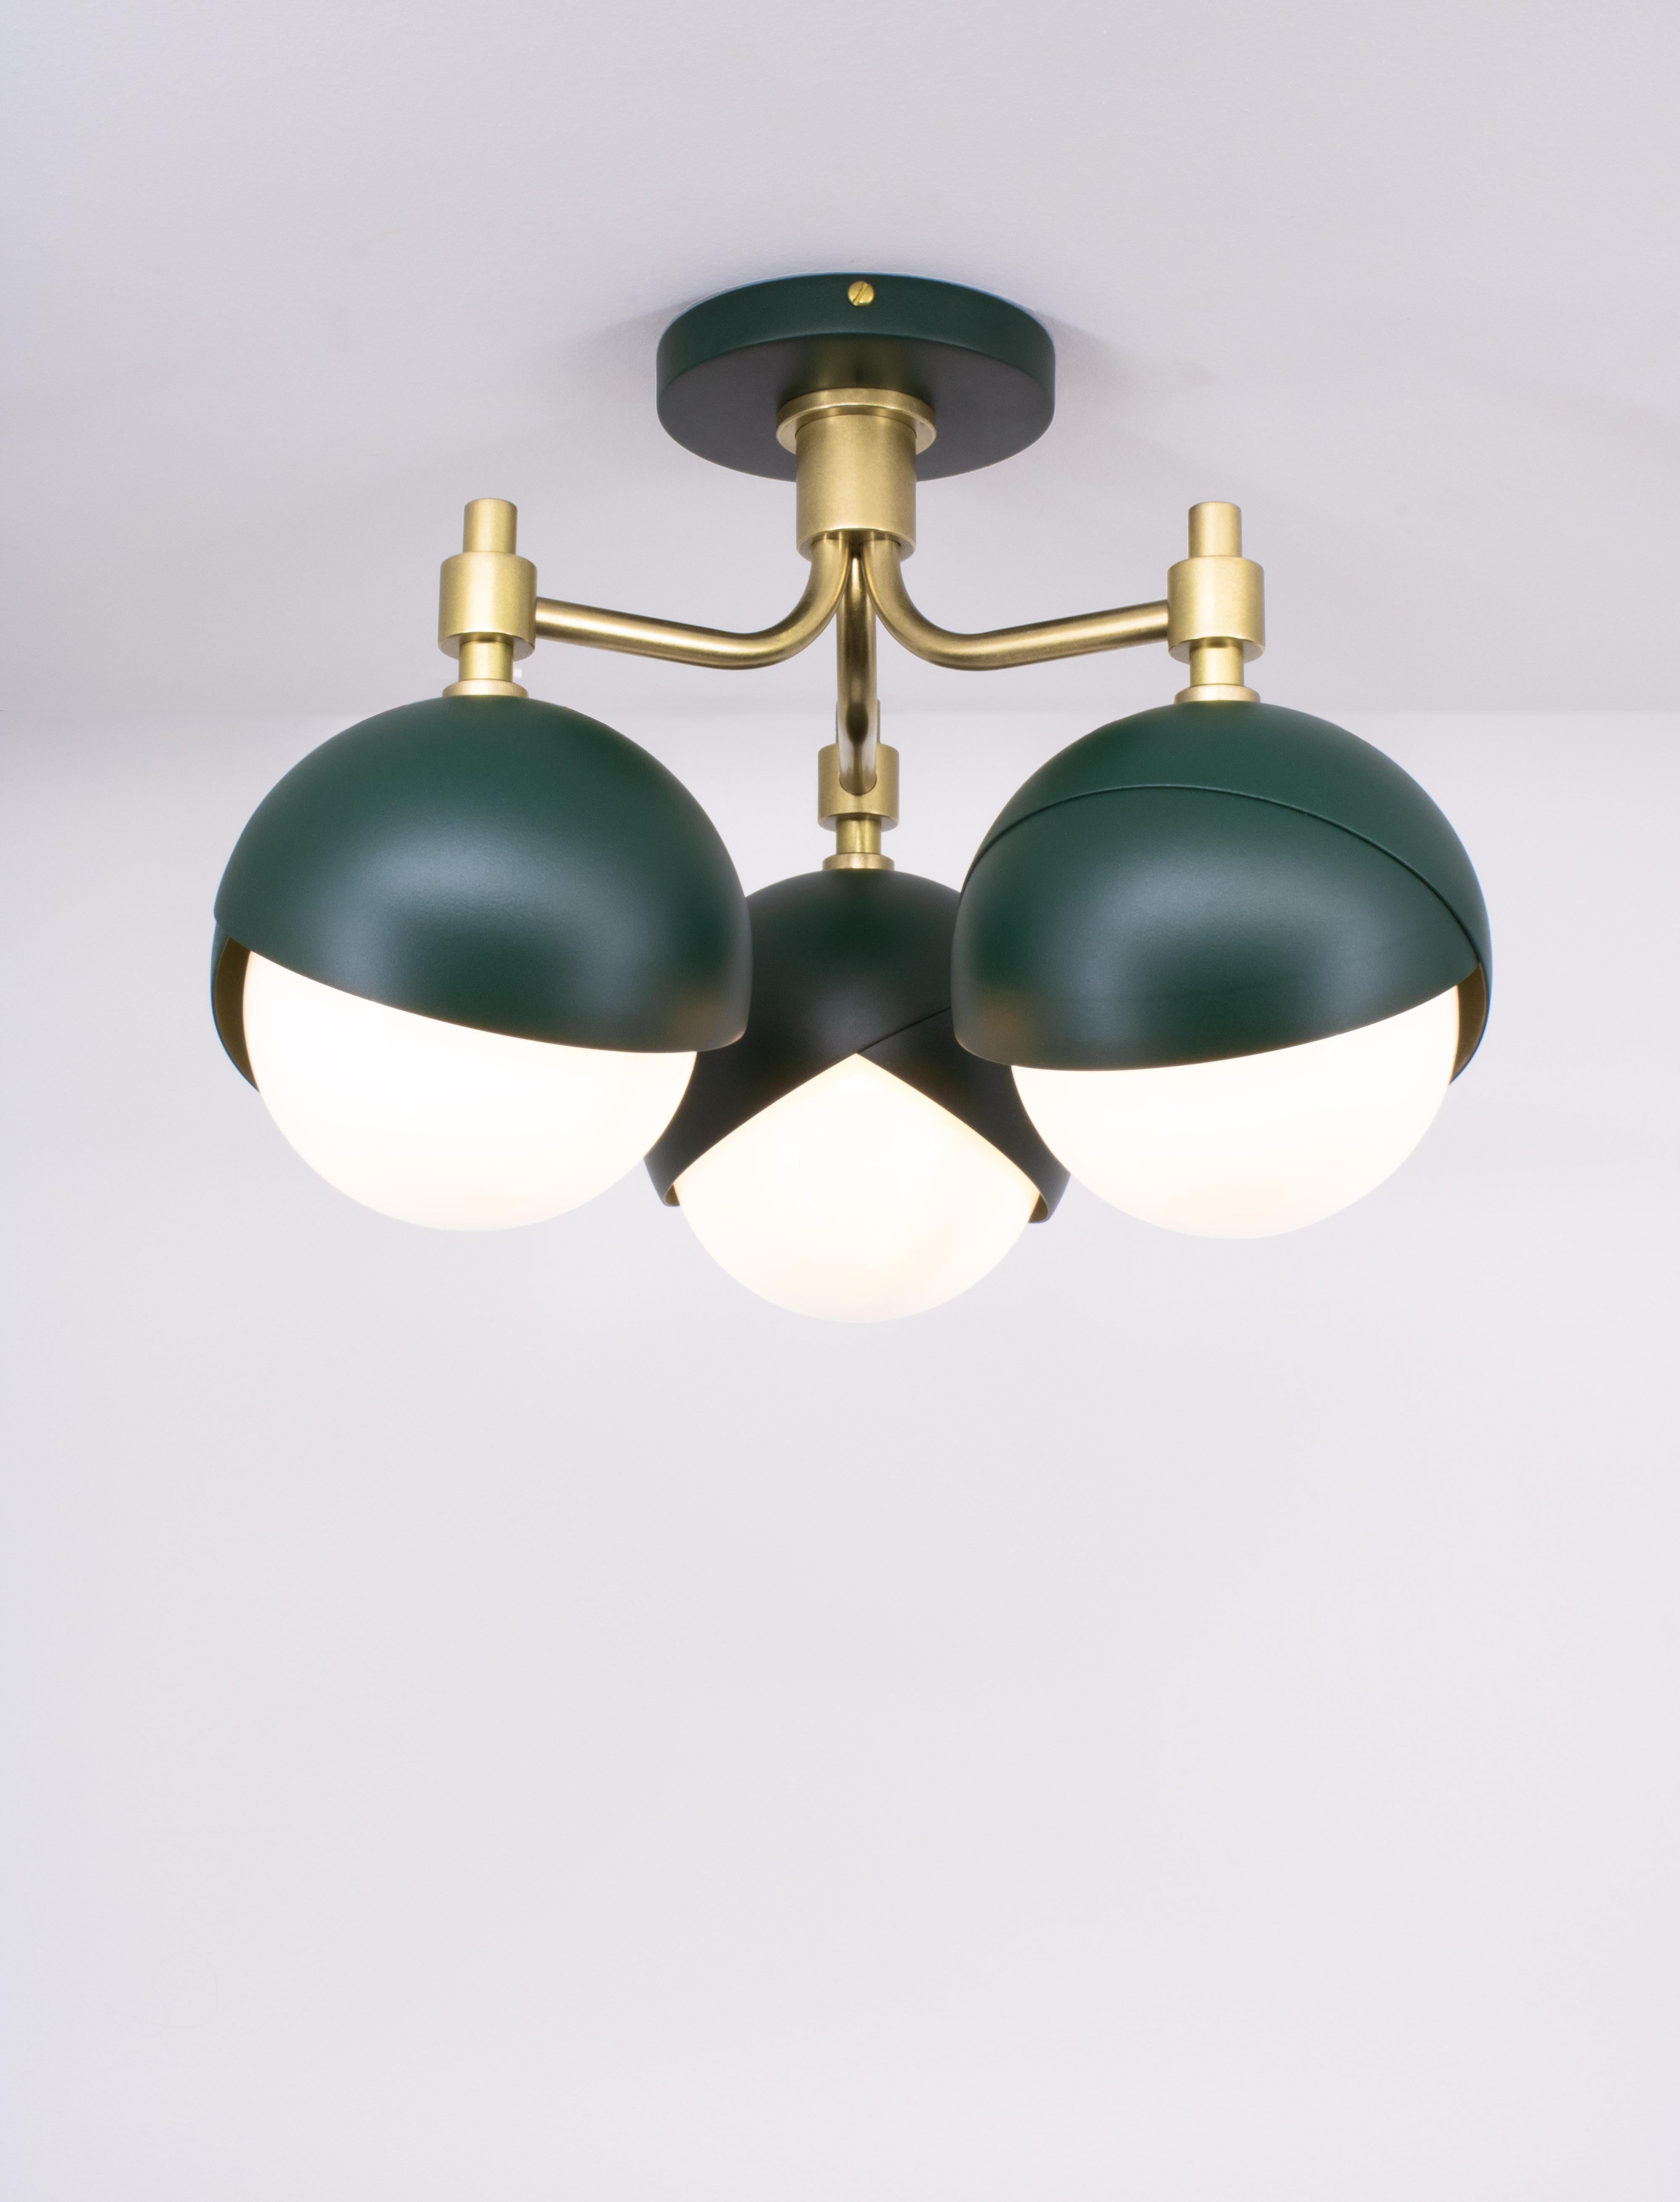 The Benedict™ three light lantern arranges three 6 inch Benedict™ light assemblies in a condensed bloom perfect for entry ways, stair wells, and other transitional spaces. Shown here in Matte Green powder coat and burnished brass. 

LAMPING:
Provide